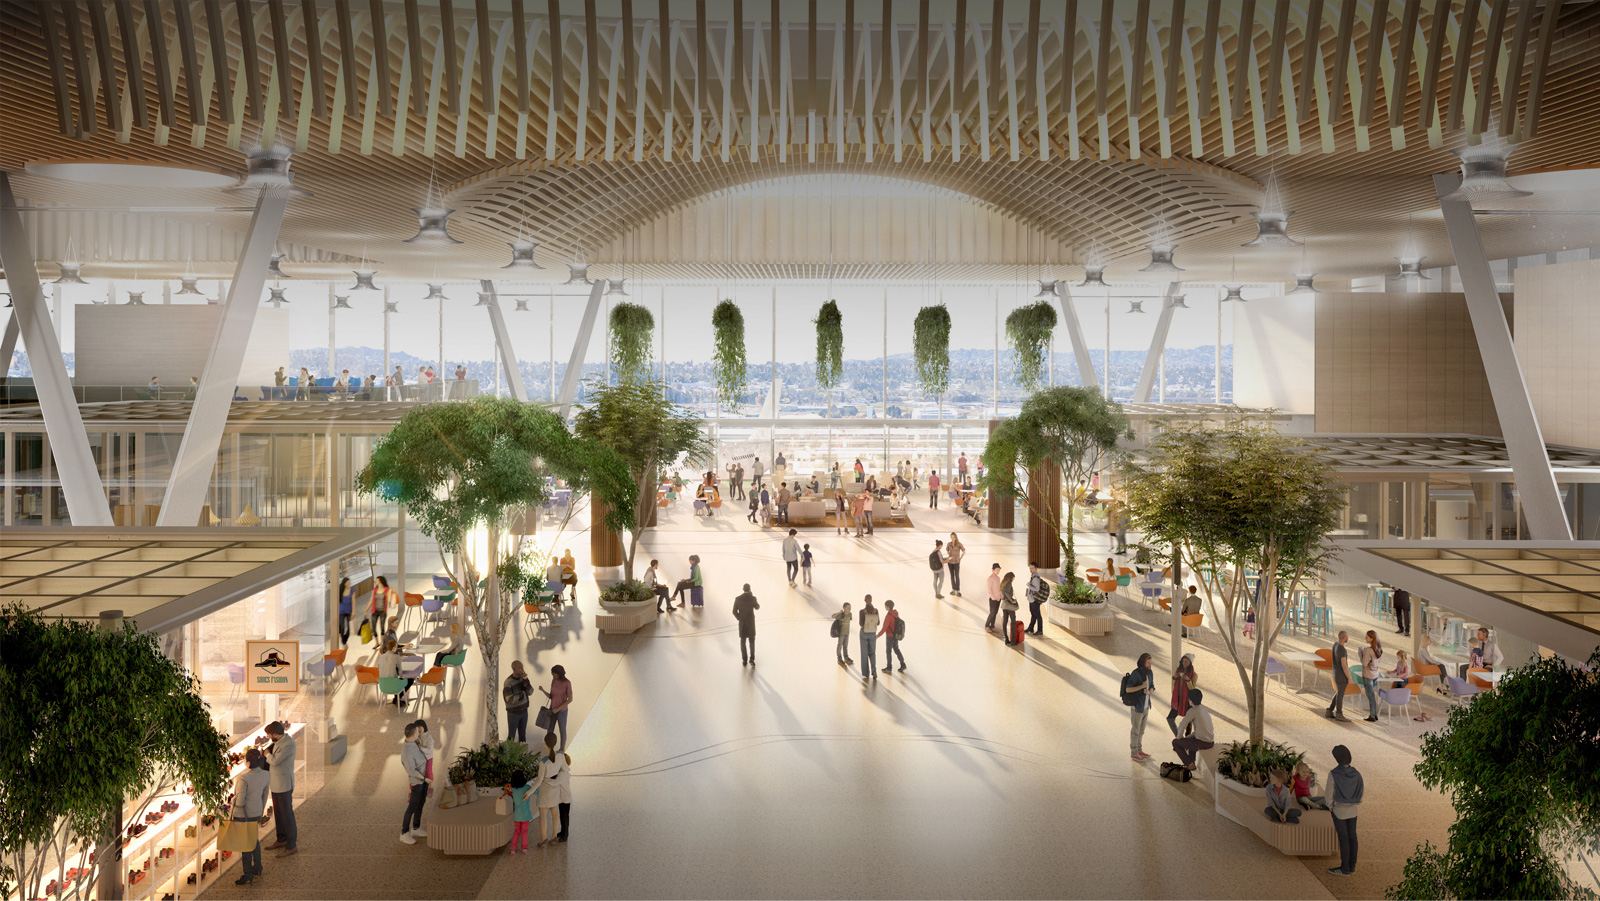 Concessions for the new terminal